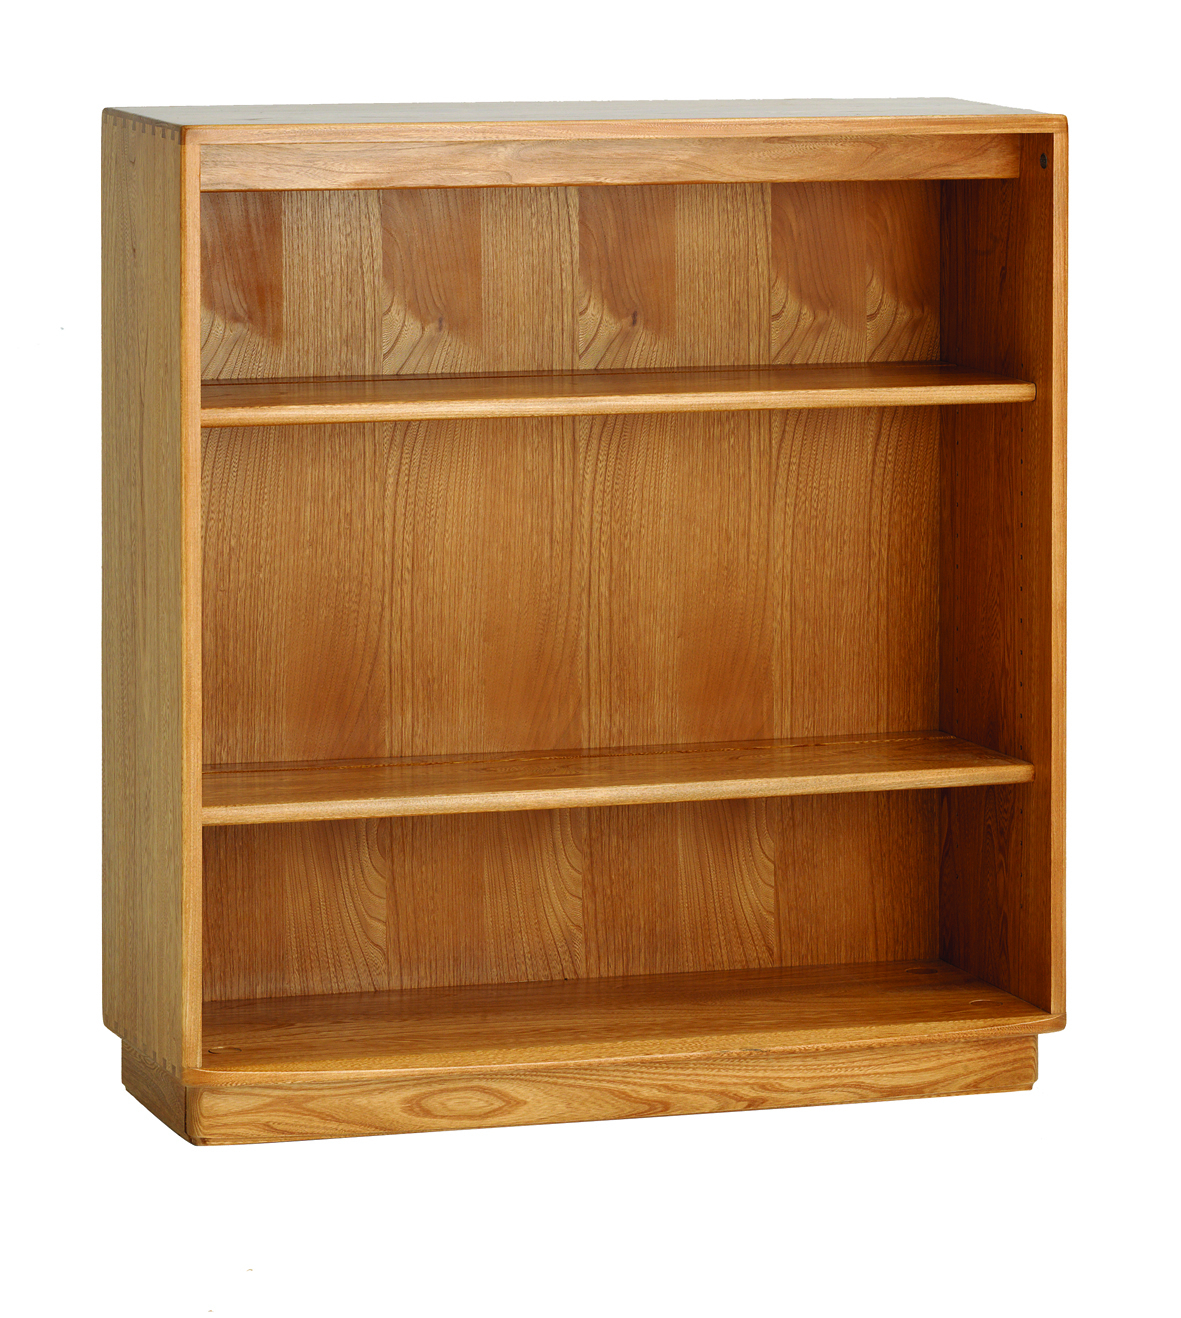 Ercol Windsor Small Bookcase pertaining to sizing 1181 X 1318